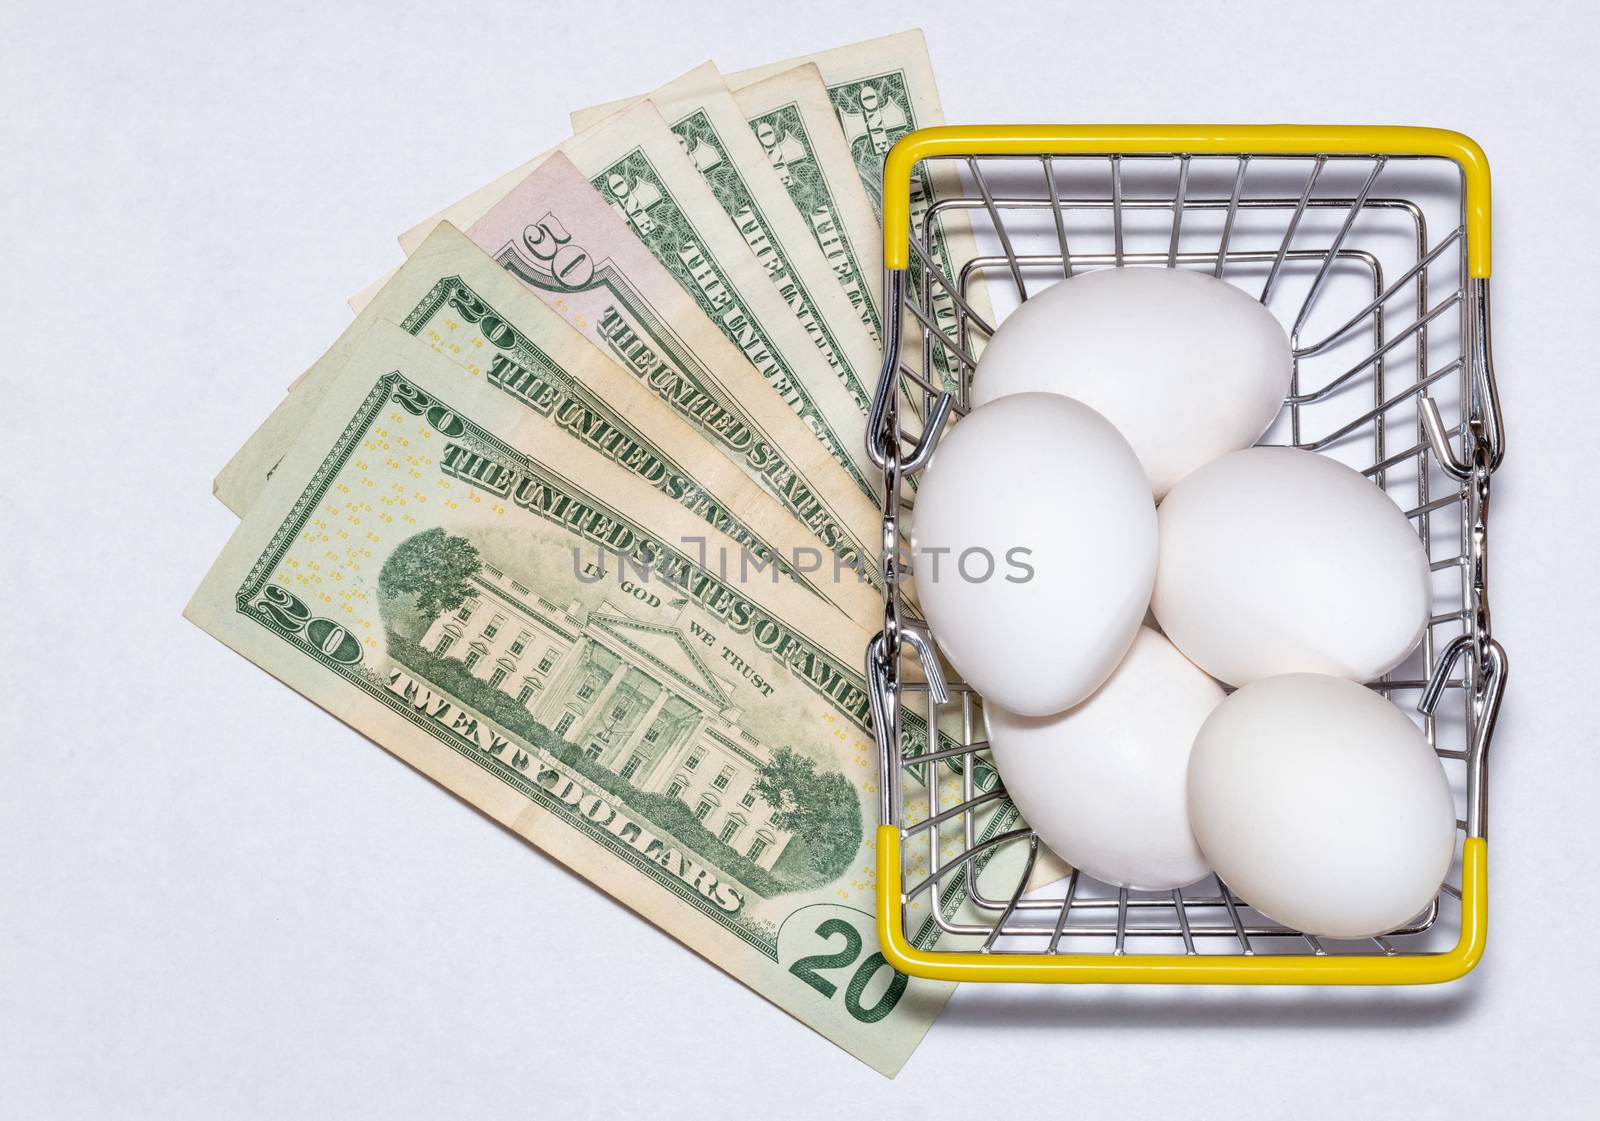 Fresh eggs in a shopping cart with various US dollar bills underneath it. Shopping, purchasing, and food delivery concept. by DamantisZ